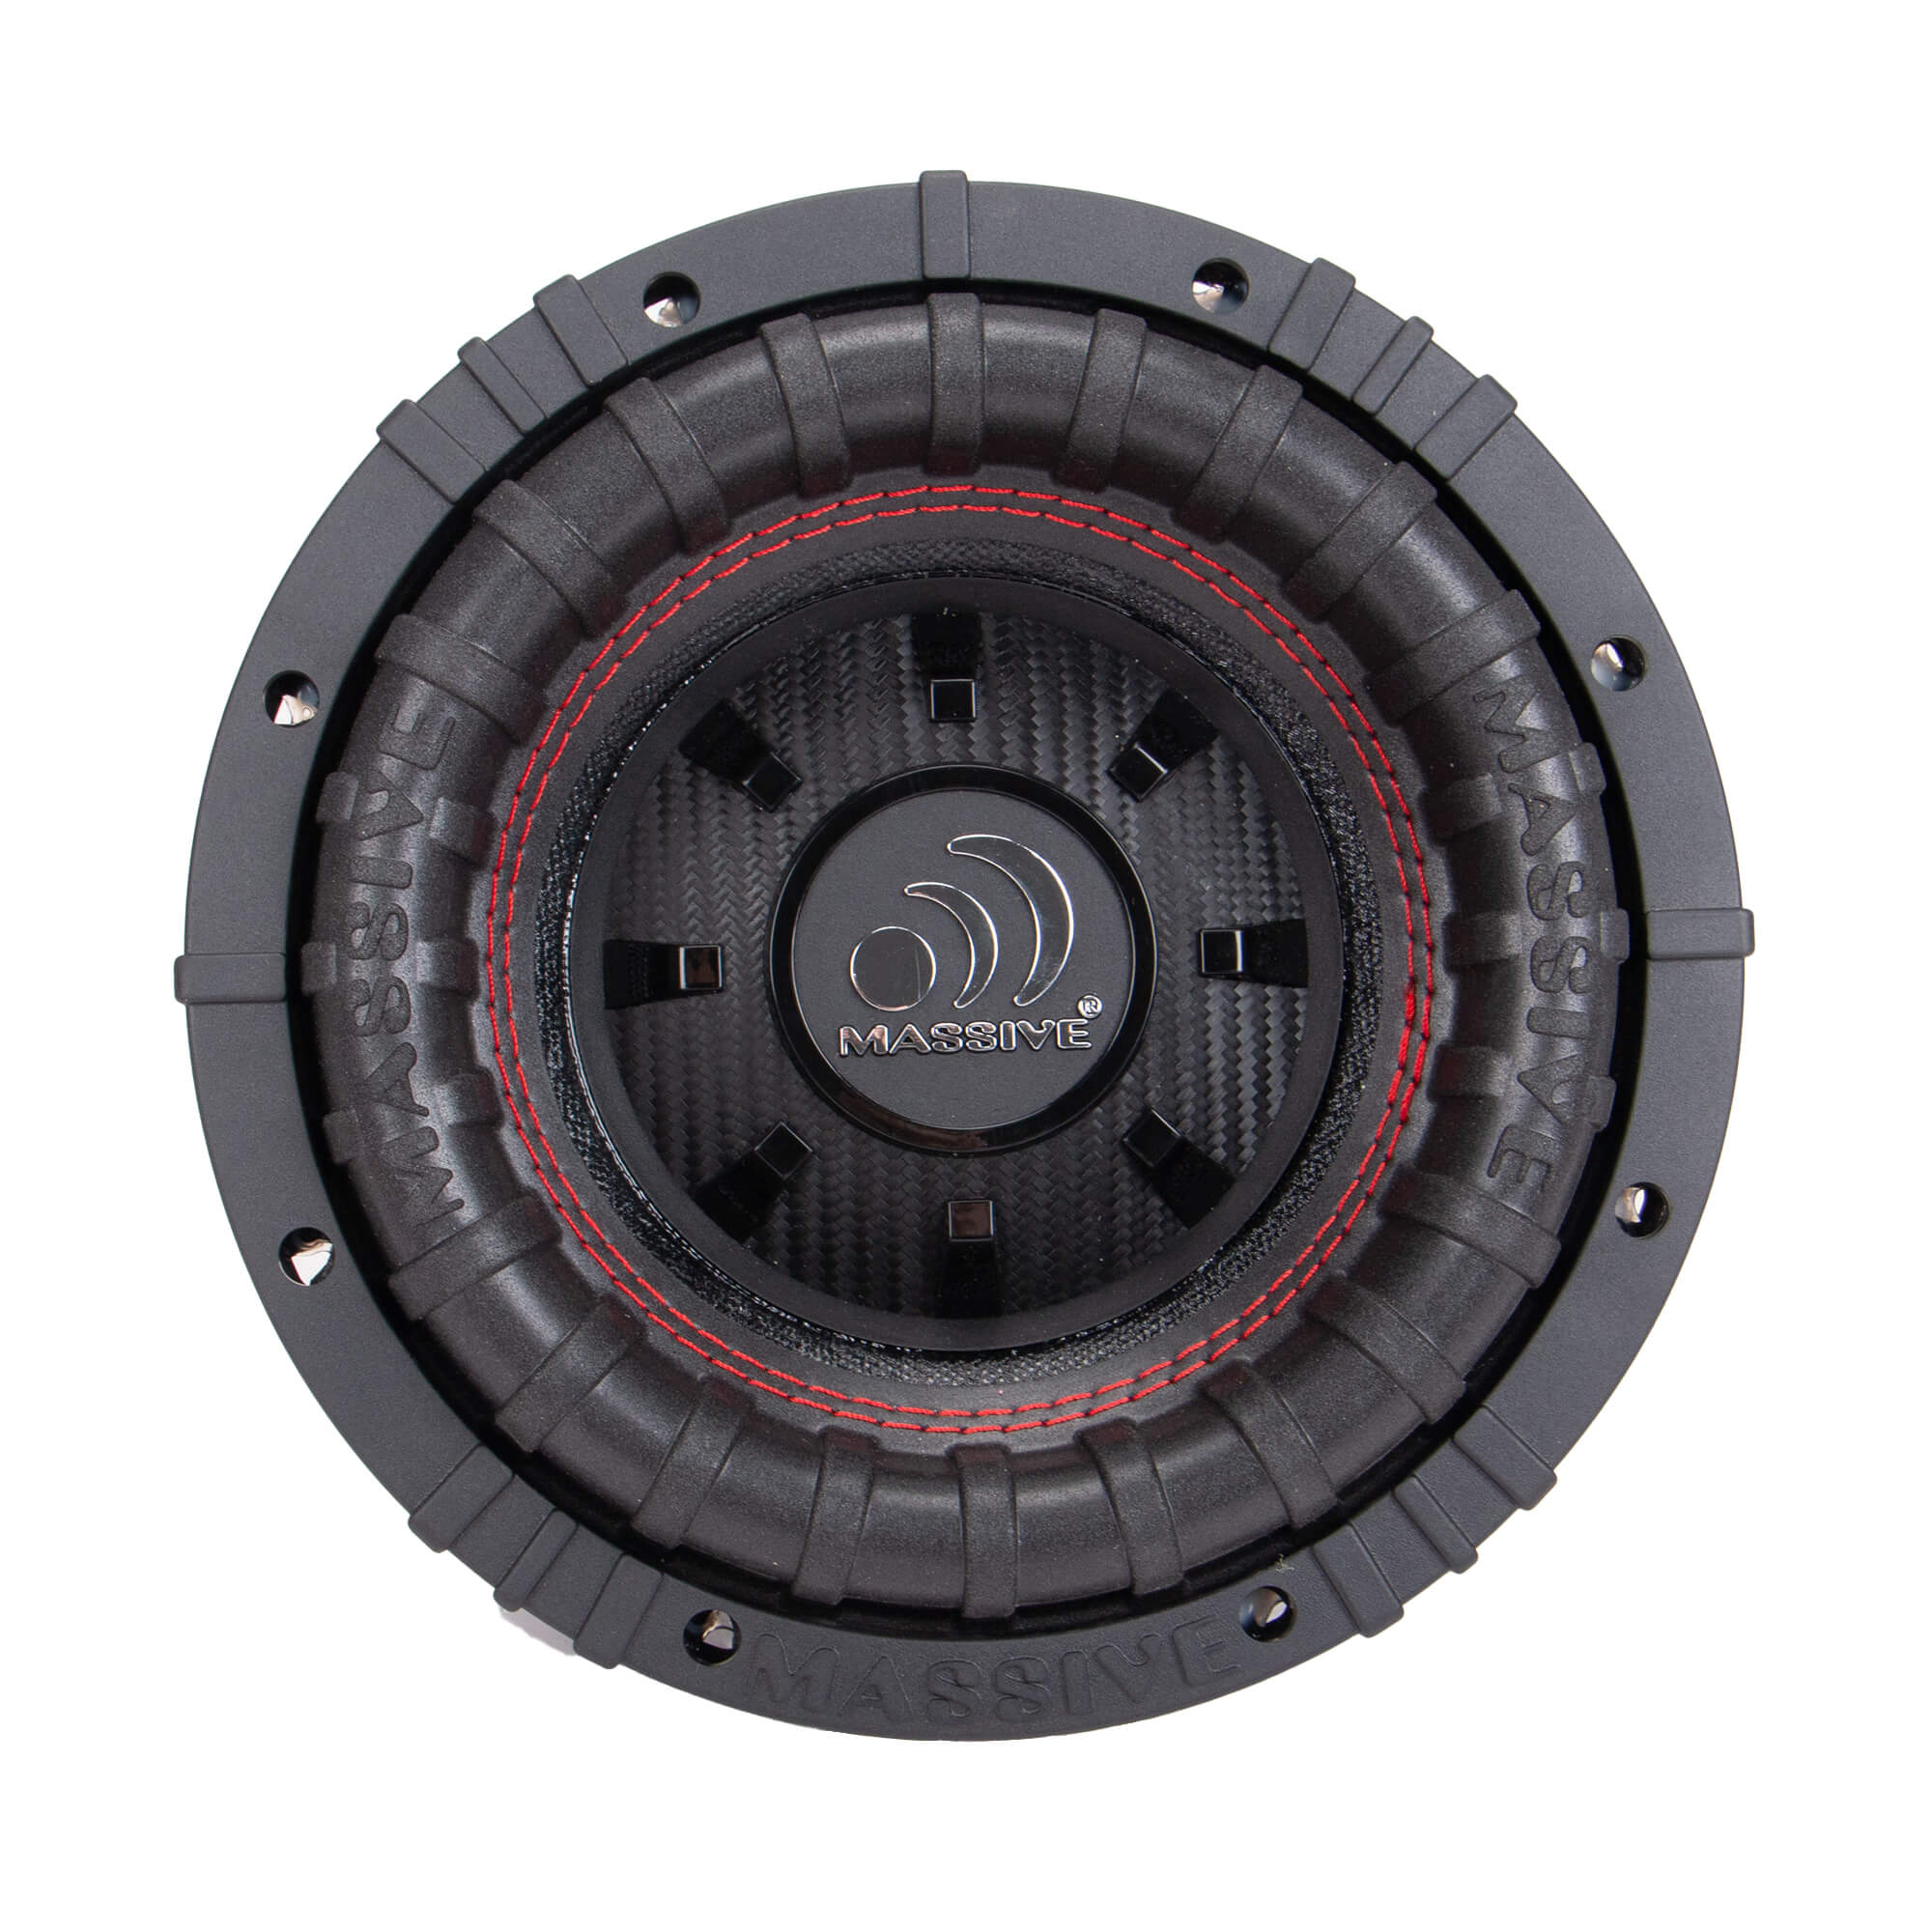 GTR84 - 8" 600 Watts RMS Dual 4 Ohm Subwoofer